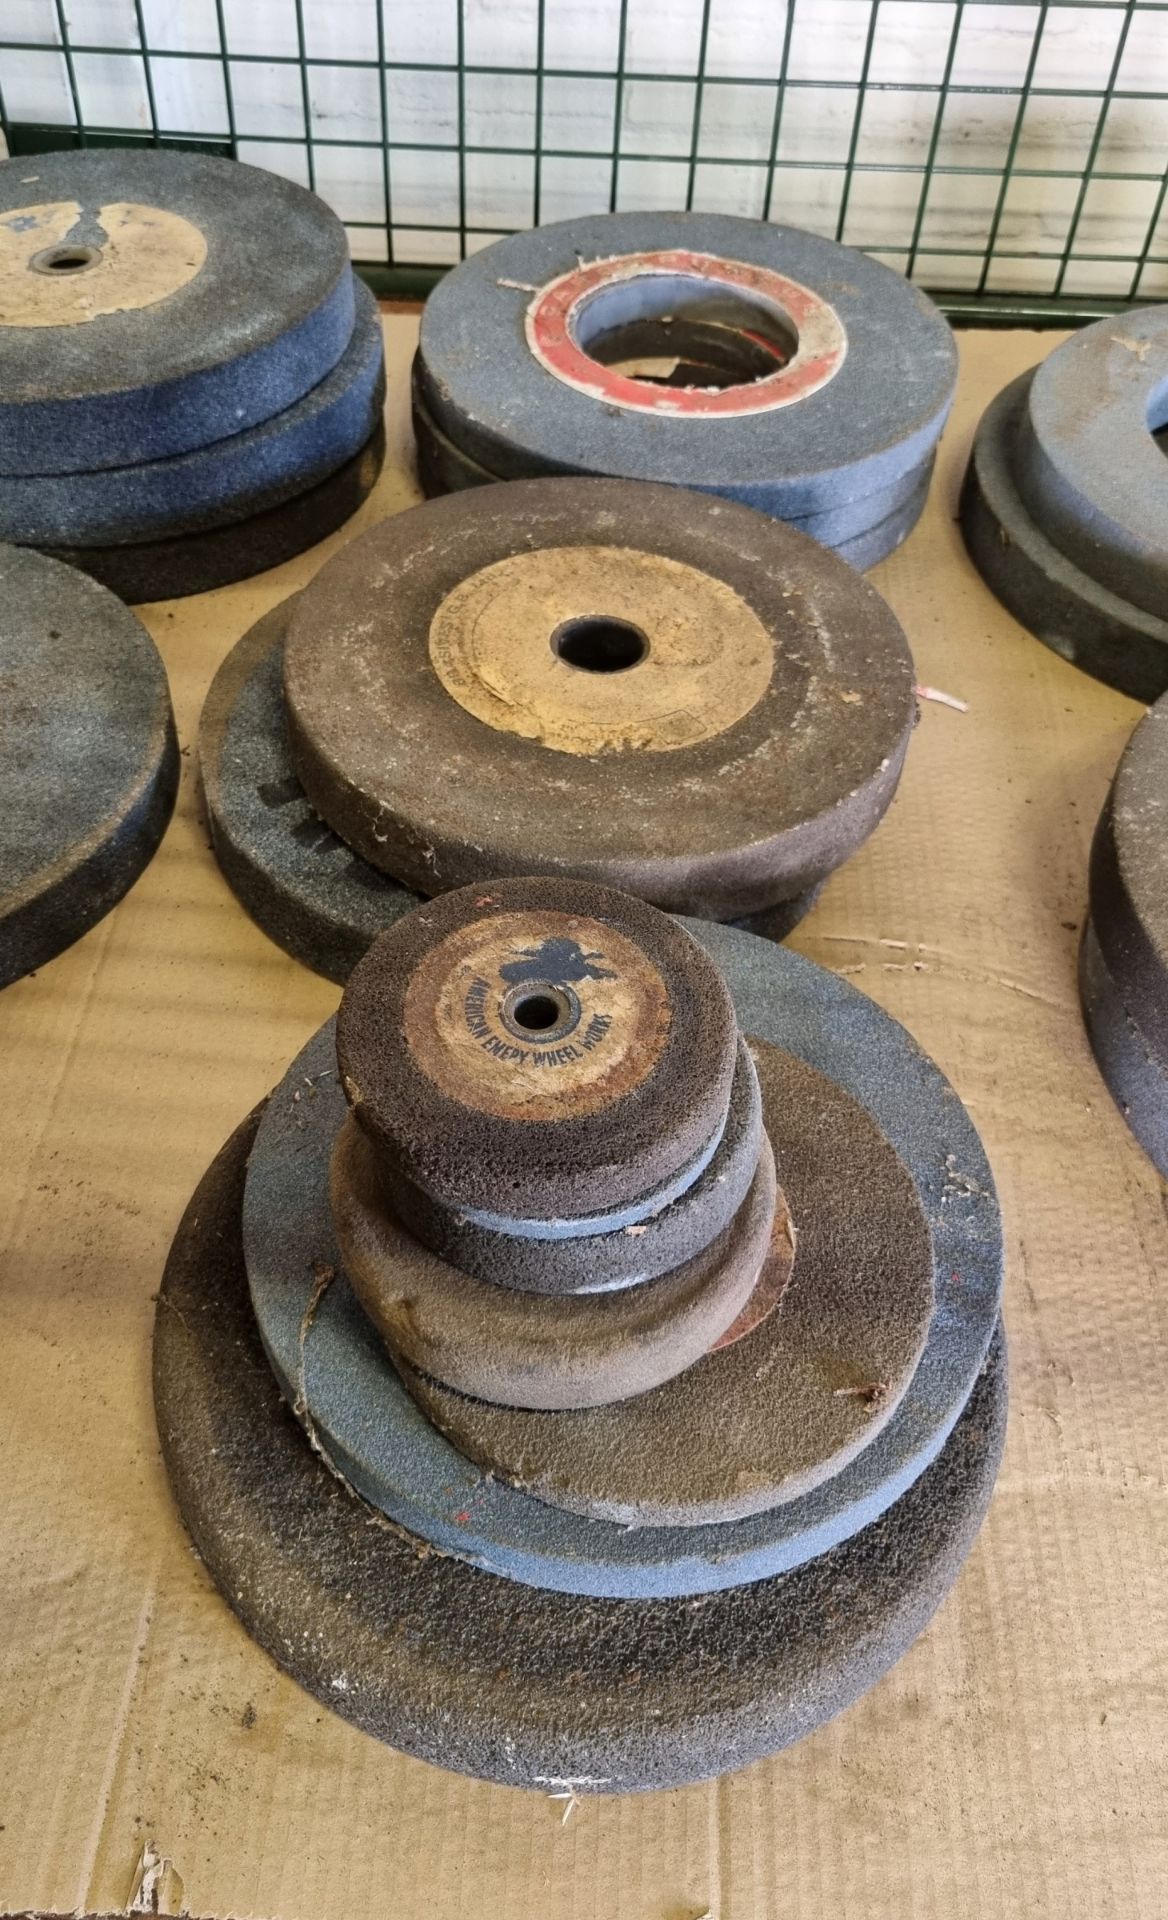 23x Metal grinding stones - mixed sizes - Image 3 of 6